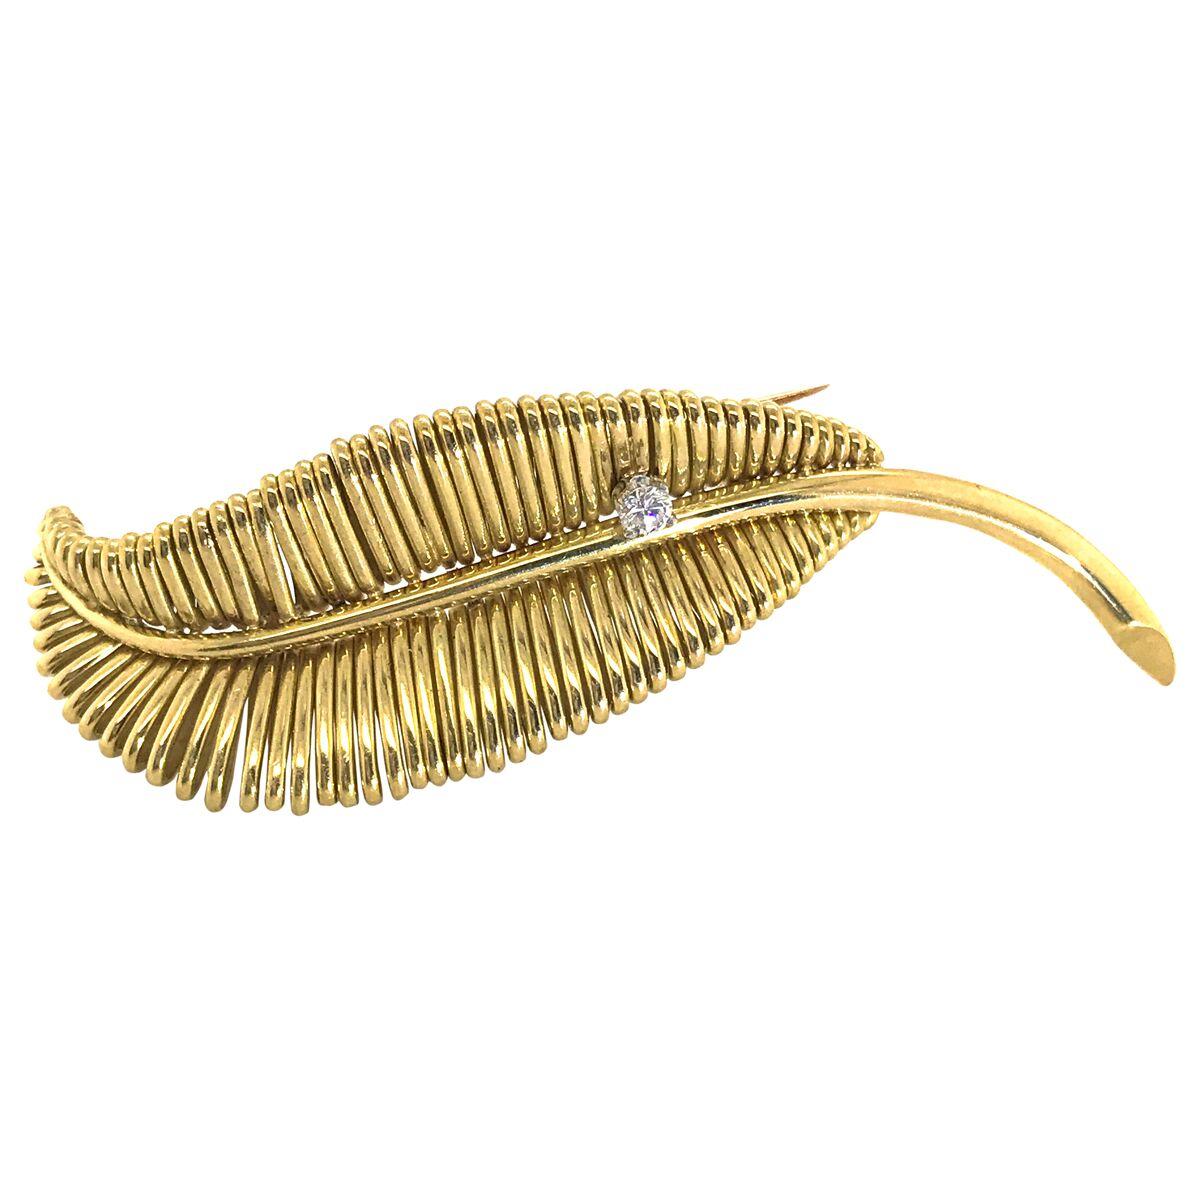 Simplistic but adds something special to your outfit, this pretty 18k yellow gold stylised leaf pin will look perfect on that winter jacket or coat. Not too over the top as it is a lovely size measuring 2.36 inches/ 6cm in length. Featuring a single